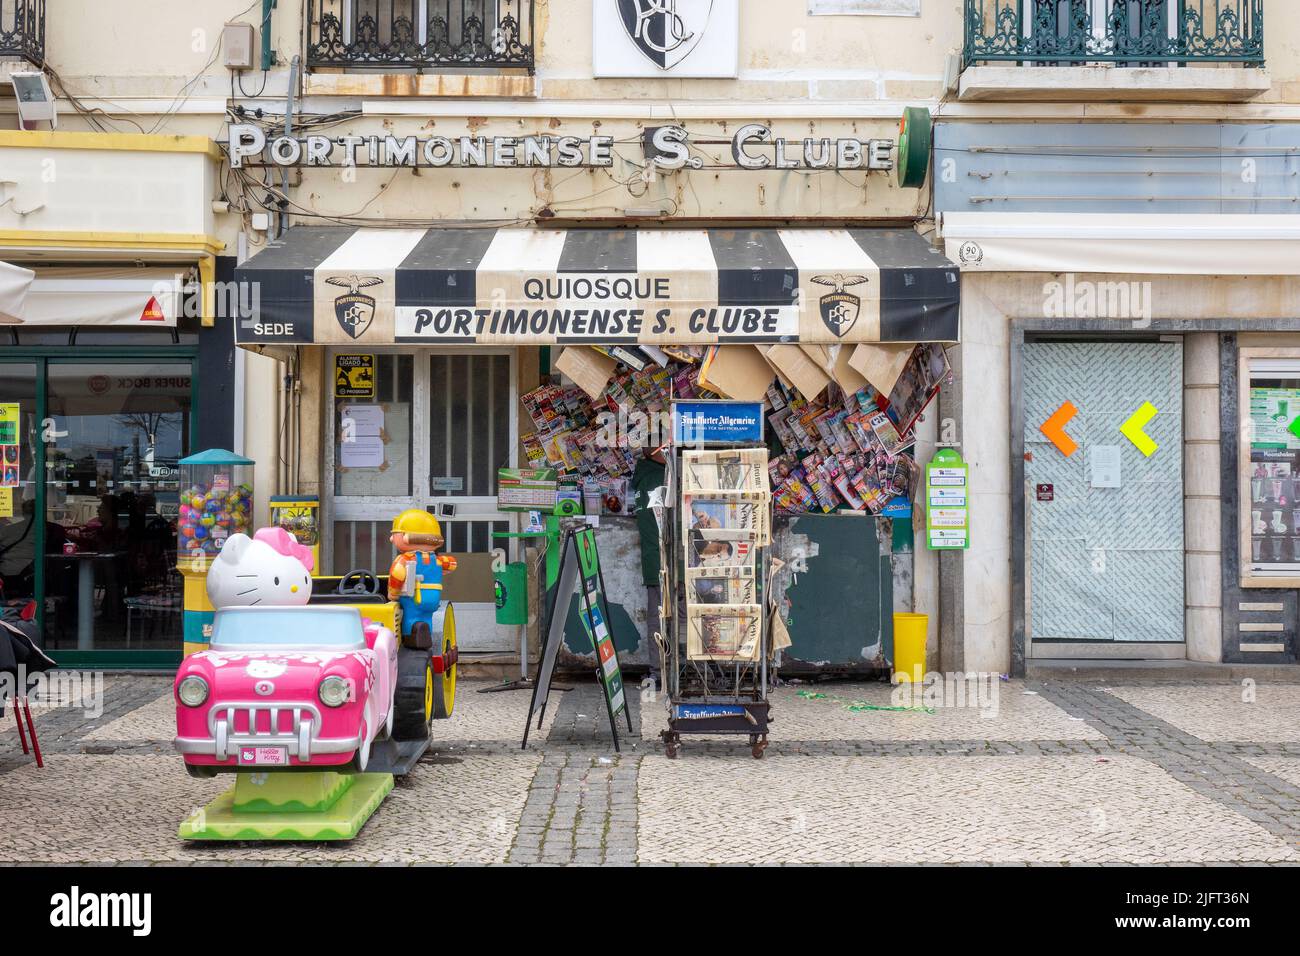 Newspaper Stand Kiosk In Front Of A Closed Down Shop Portimonense Sporting Clube In Portimao, Portugal Stock Photo